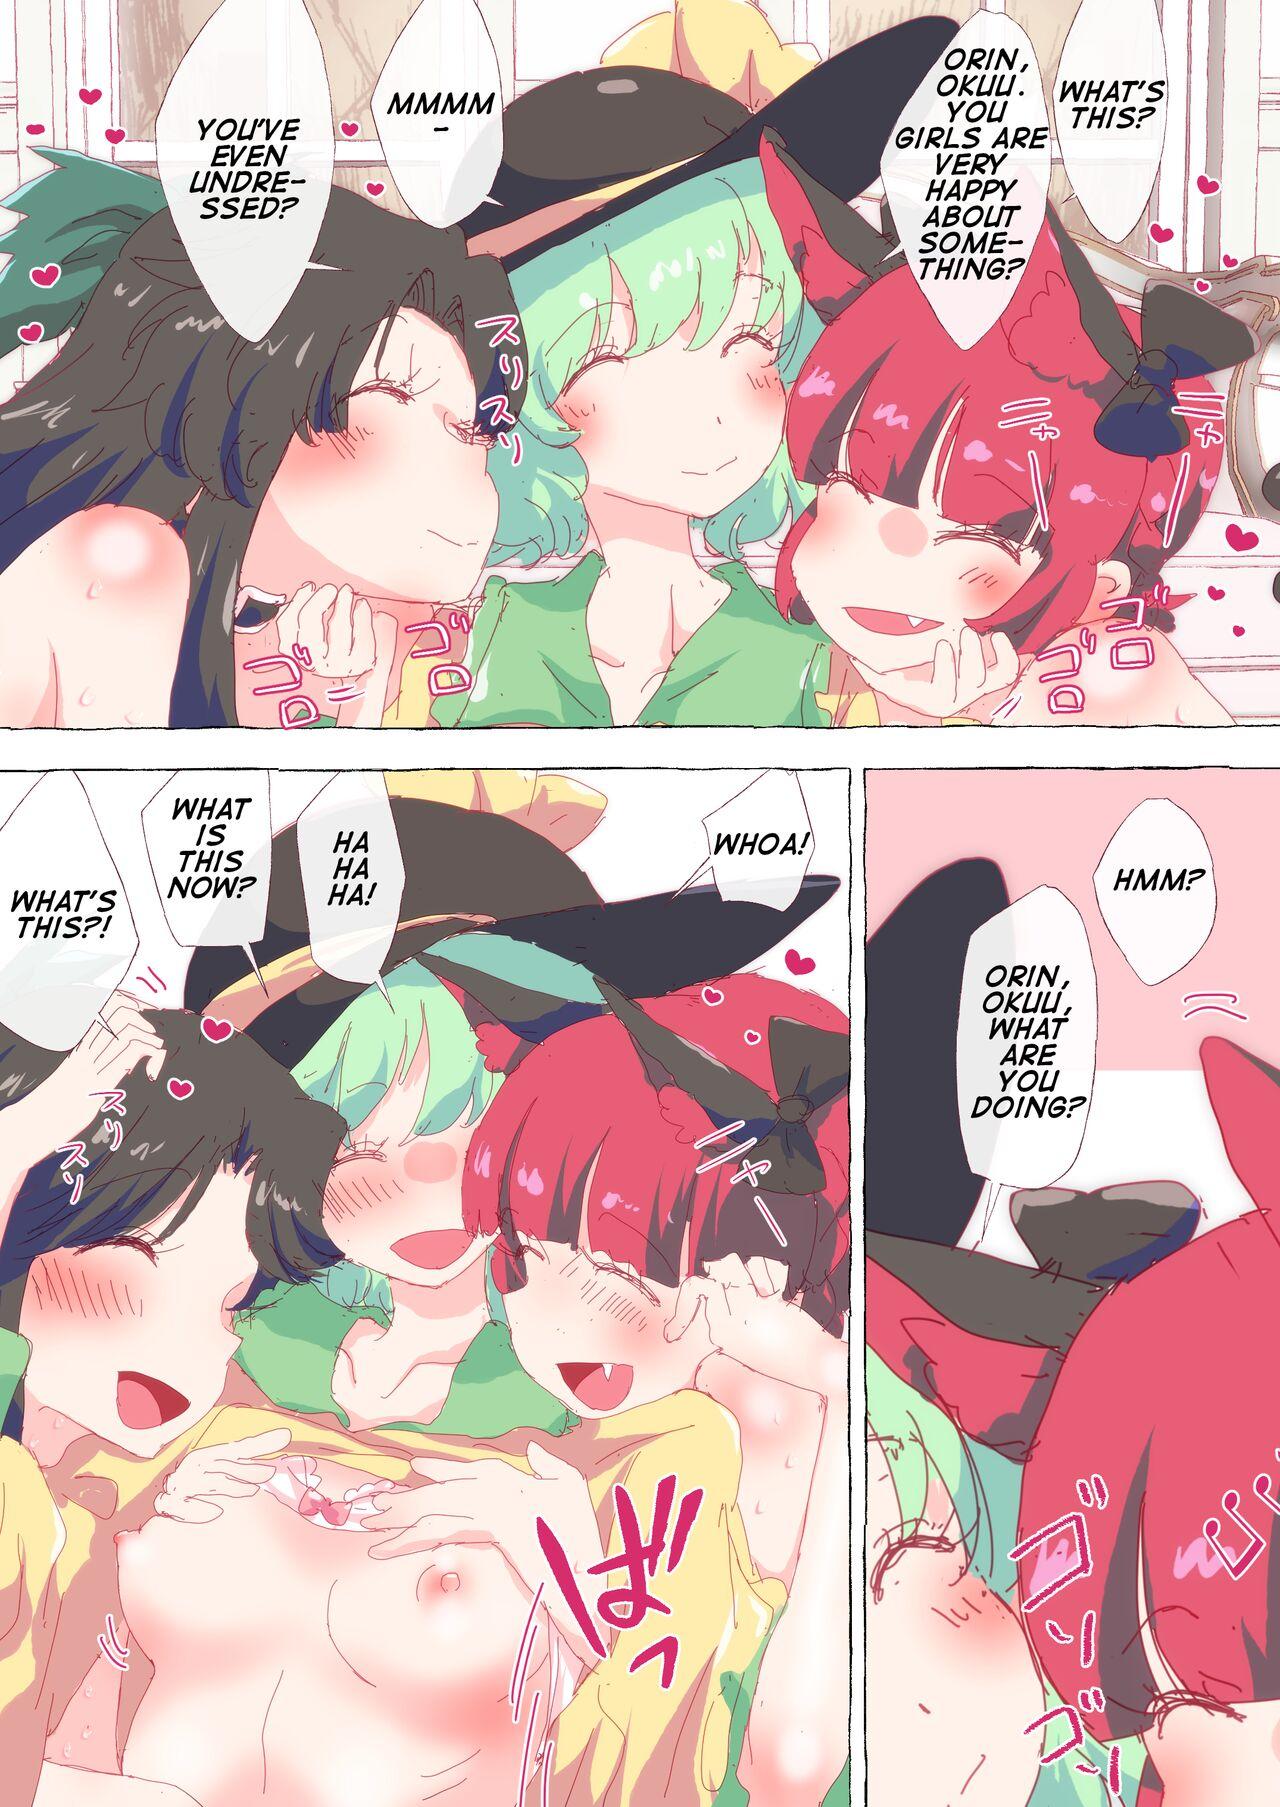 Koishi-chan caught by Orin and Okuu in heat 0